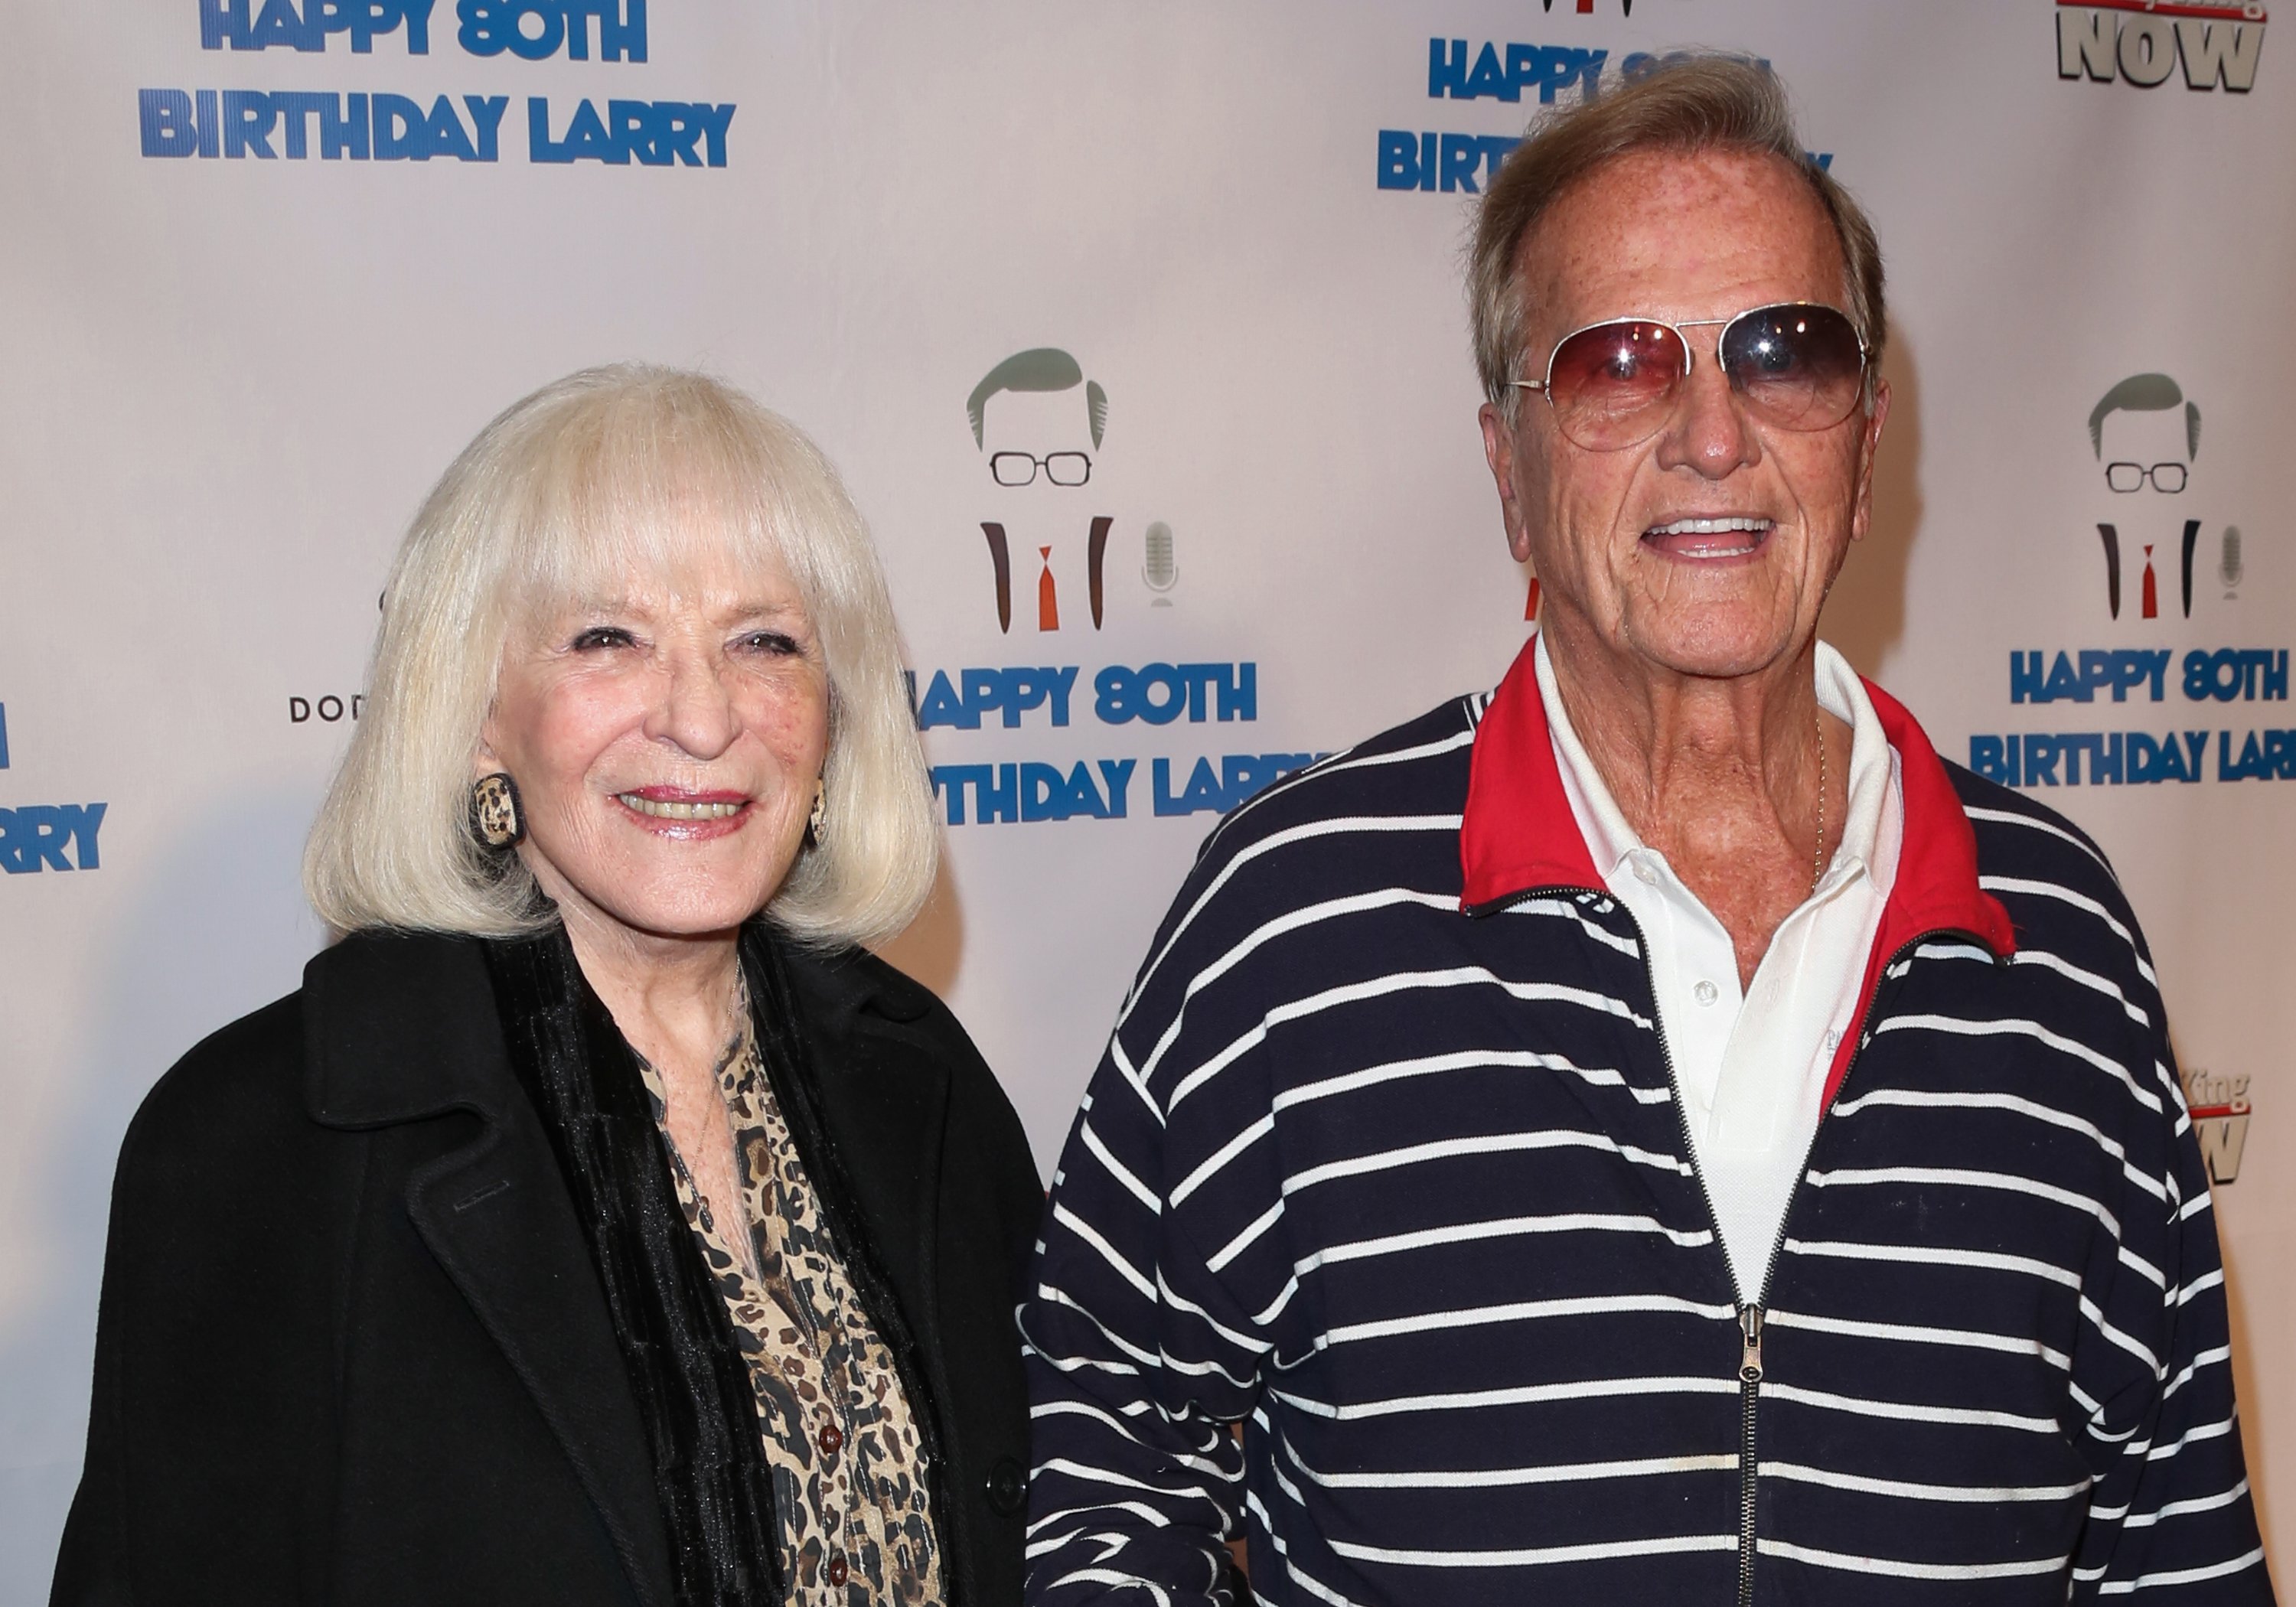 Singer Pat Boone (R) and his wife Shirley Boone attend a surprise party for Larry King's 80th Birthday at Dodger Stadium on November 15, 2013 in Los Angeles, California. | Source: Getty Images